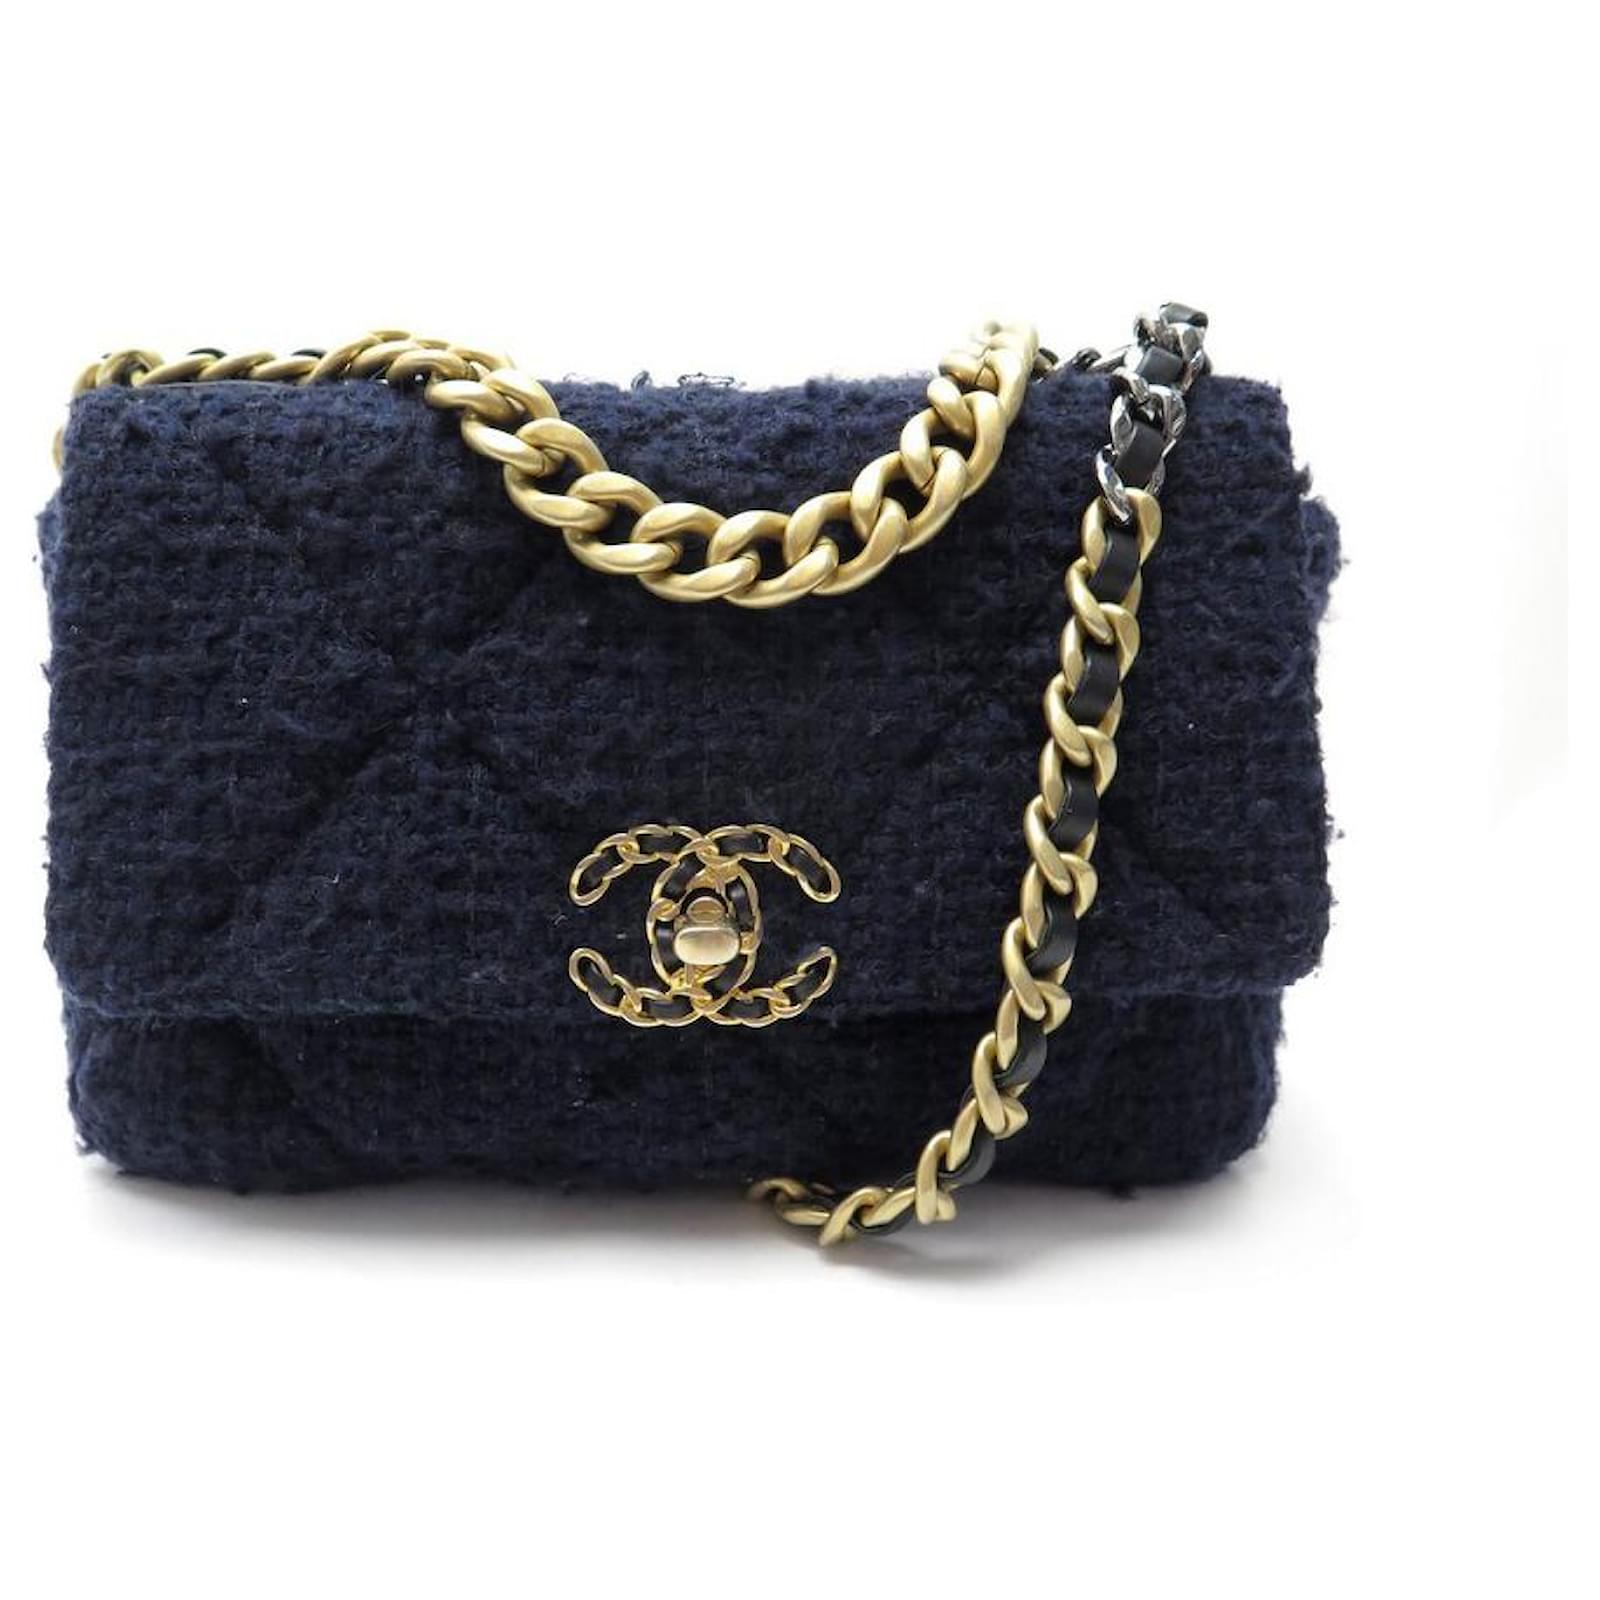 Chanel 19 leather handbag Chanel Navy in Leather - 34684943